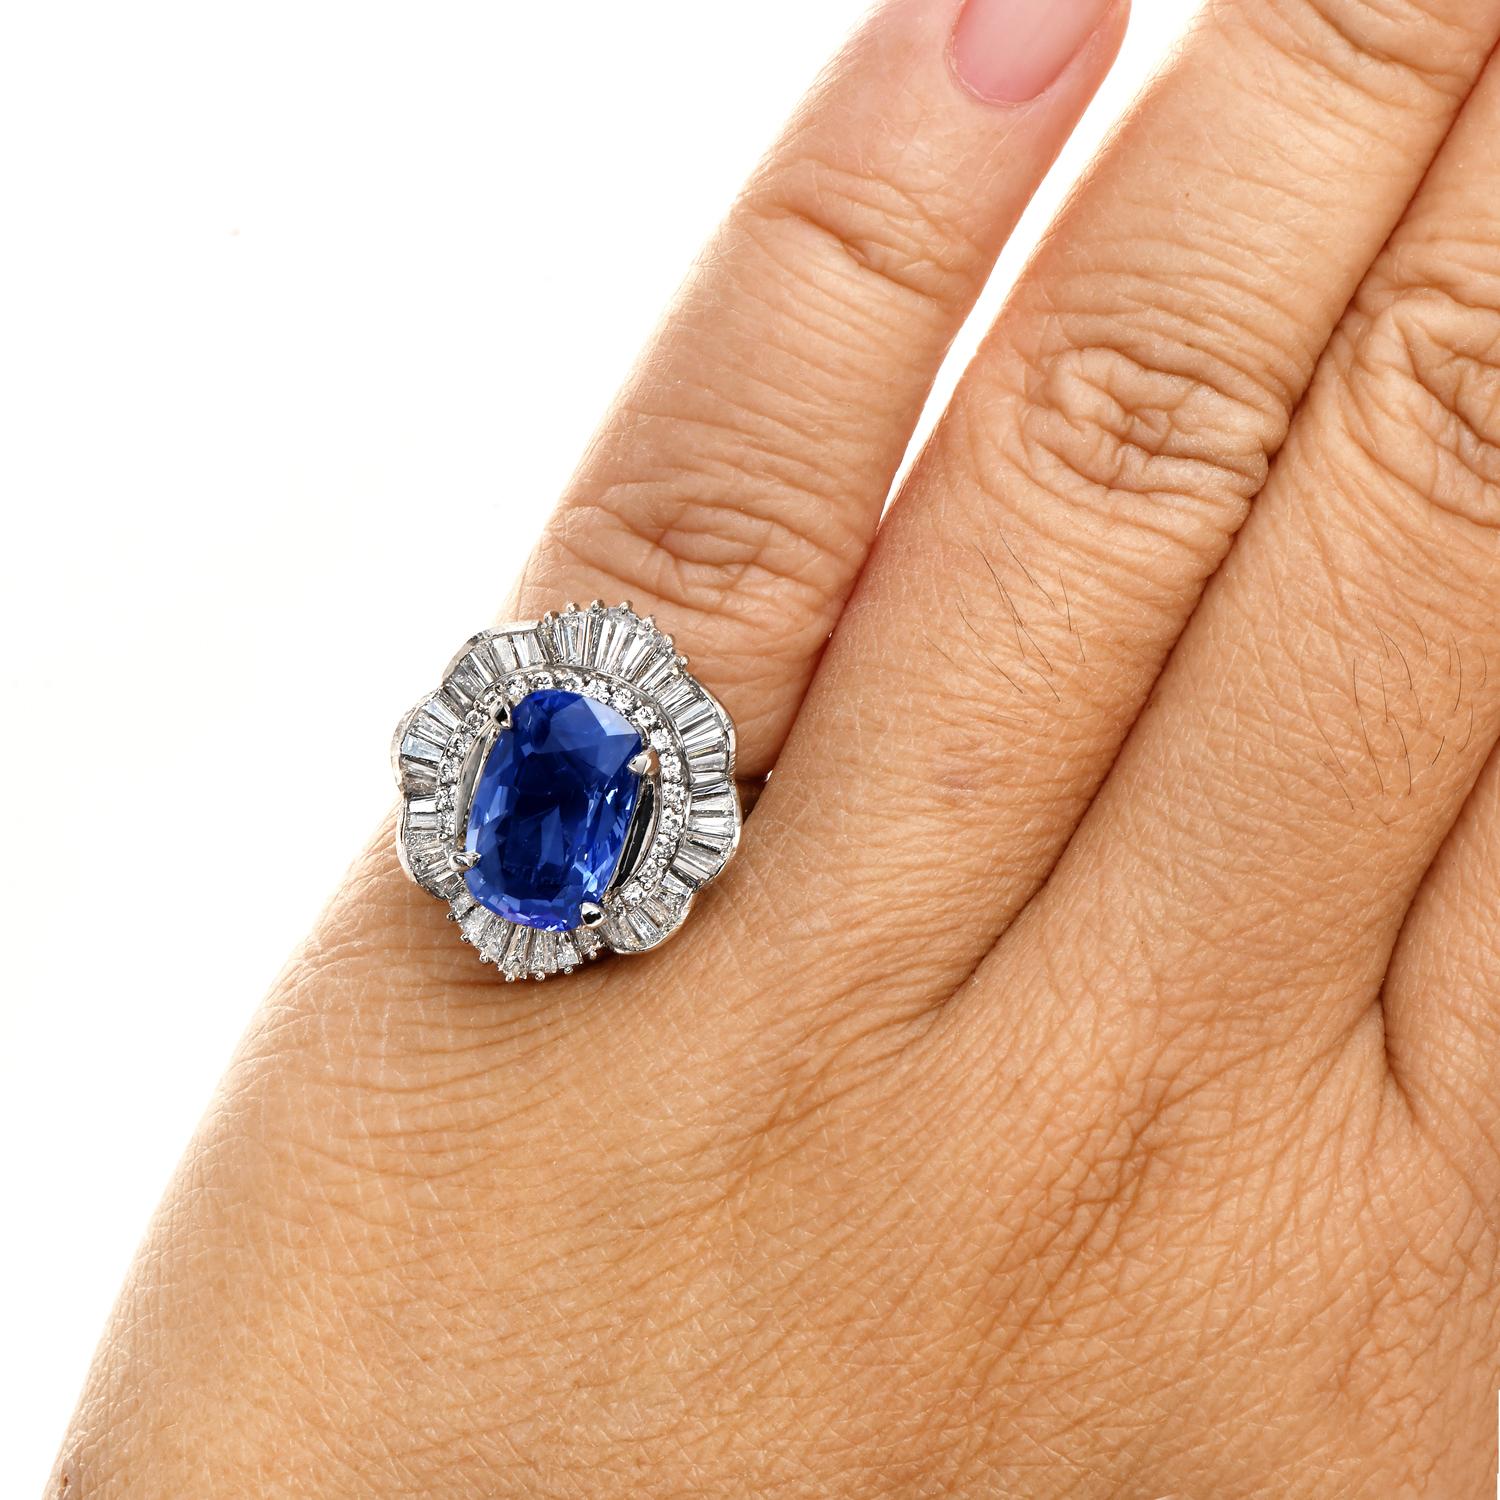 A sparkly ballerina style Blue Sri Lankan Sapphire ring can be a magnificent present or an unusual engagement ring.

Crafted in luxurious platinum, centered by a GIA-certified Blue Sapphire,  cushion cut, weighing approximately 5.87 carats, No heat